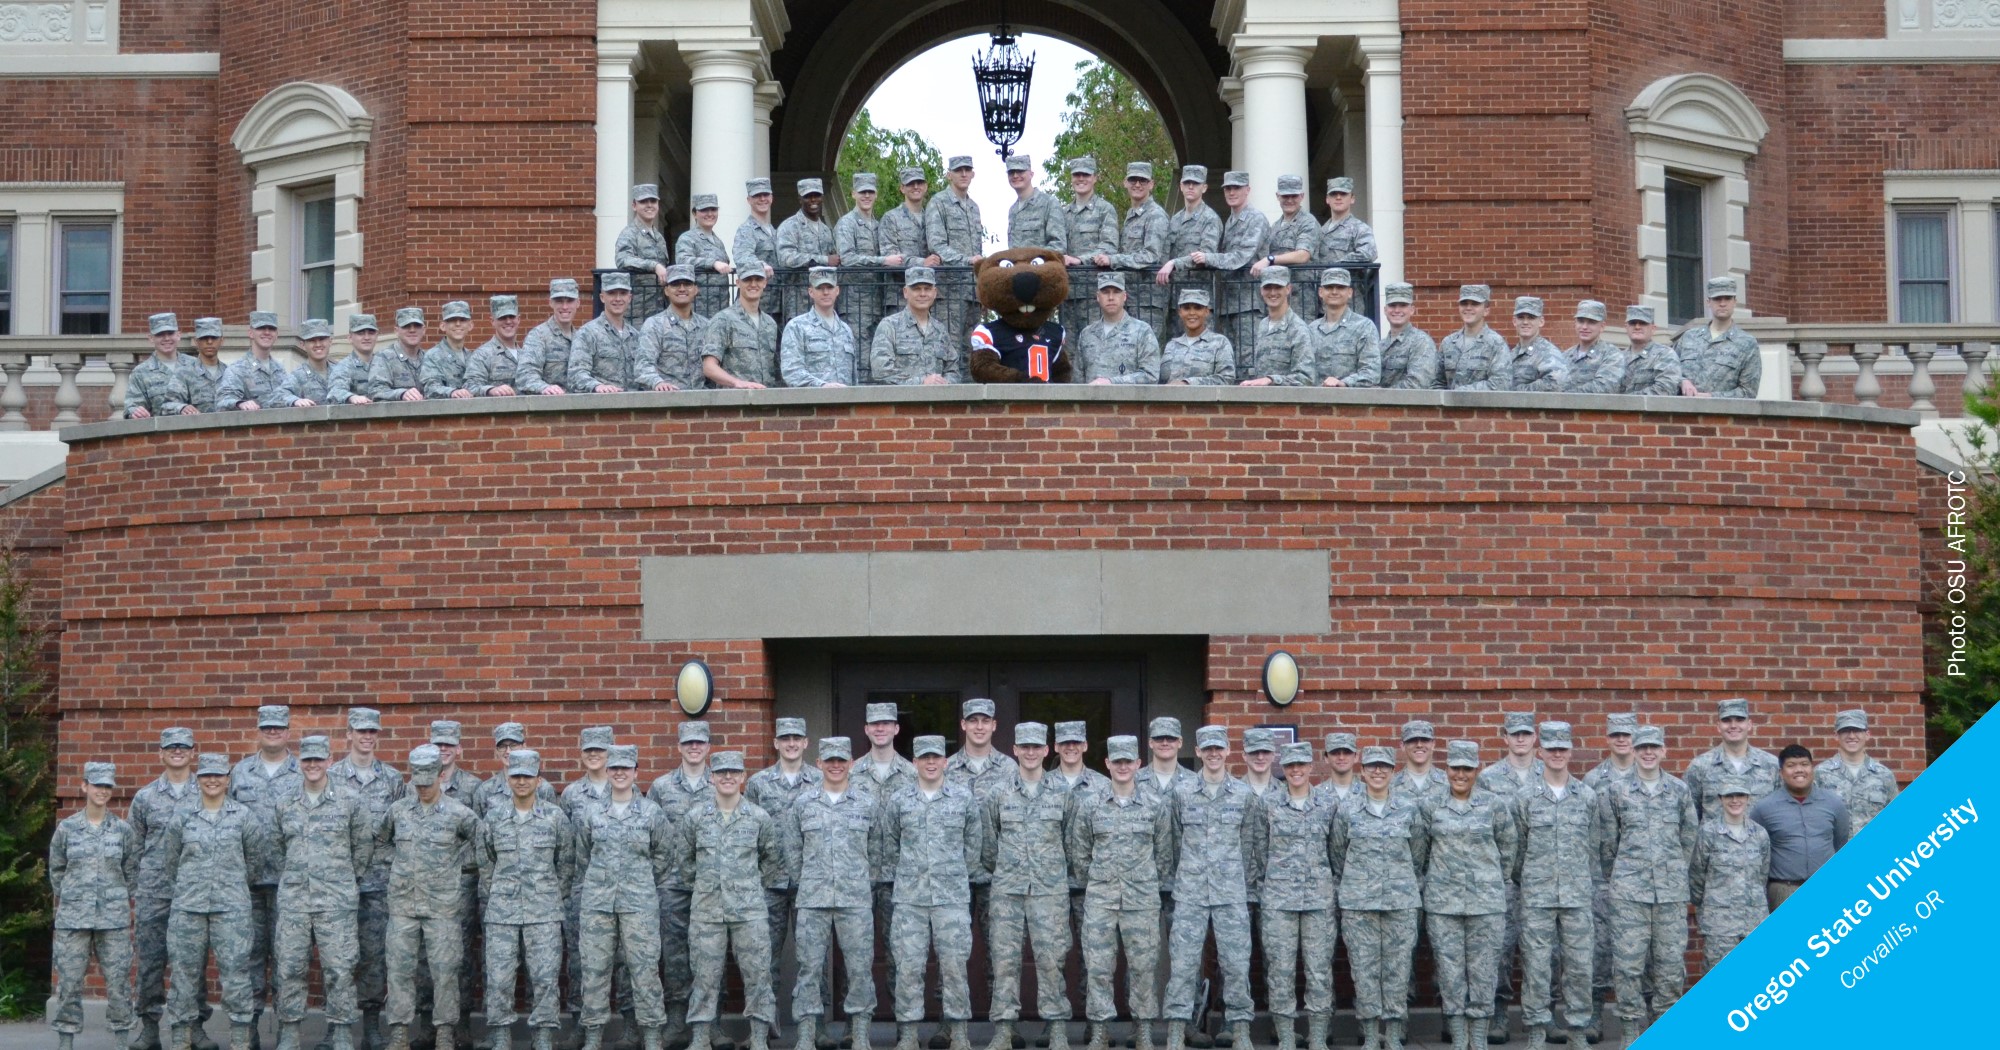 ROTC students in uniform at Oregon State University